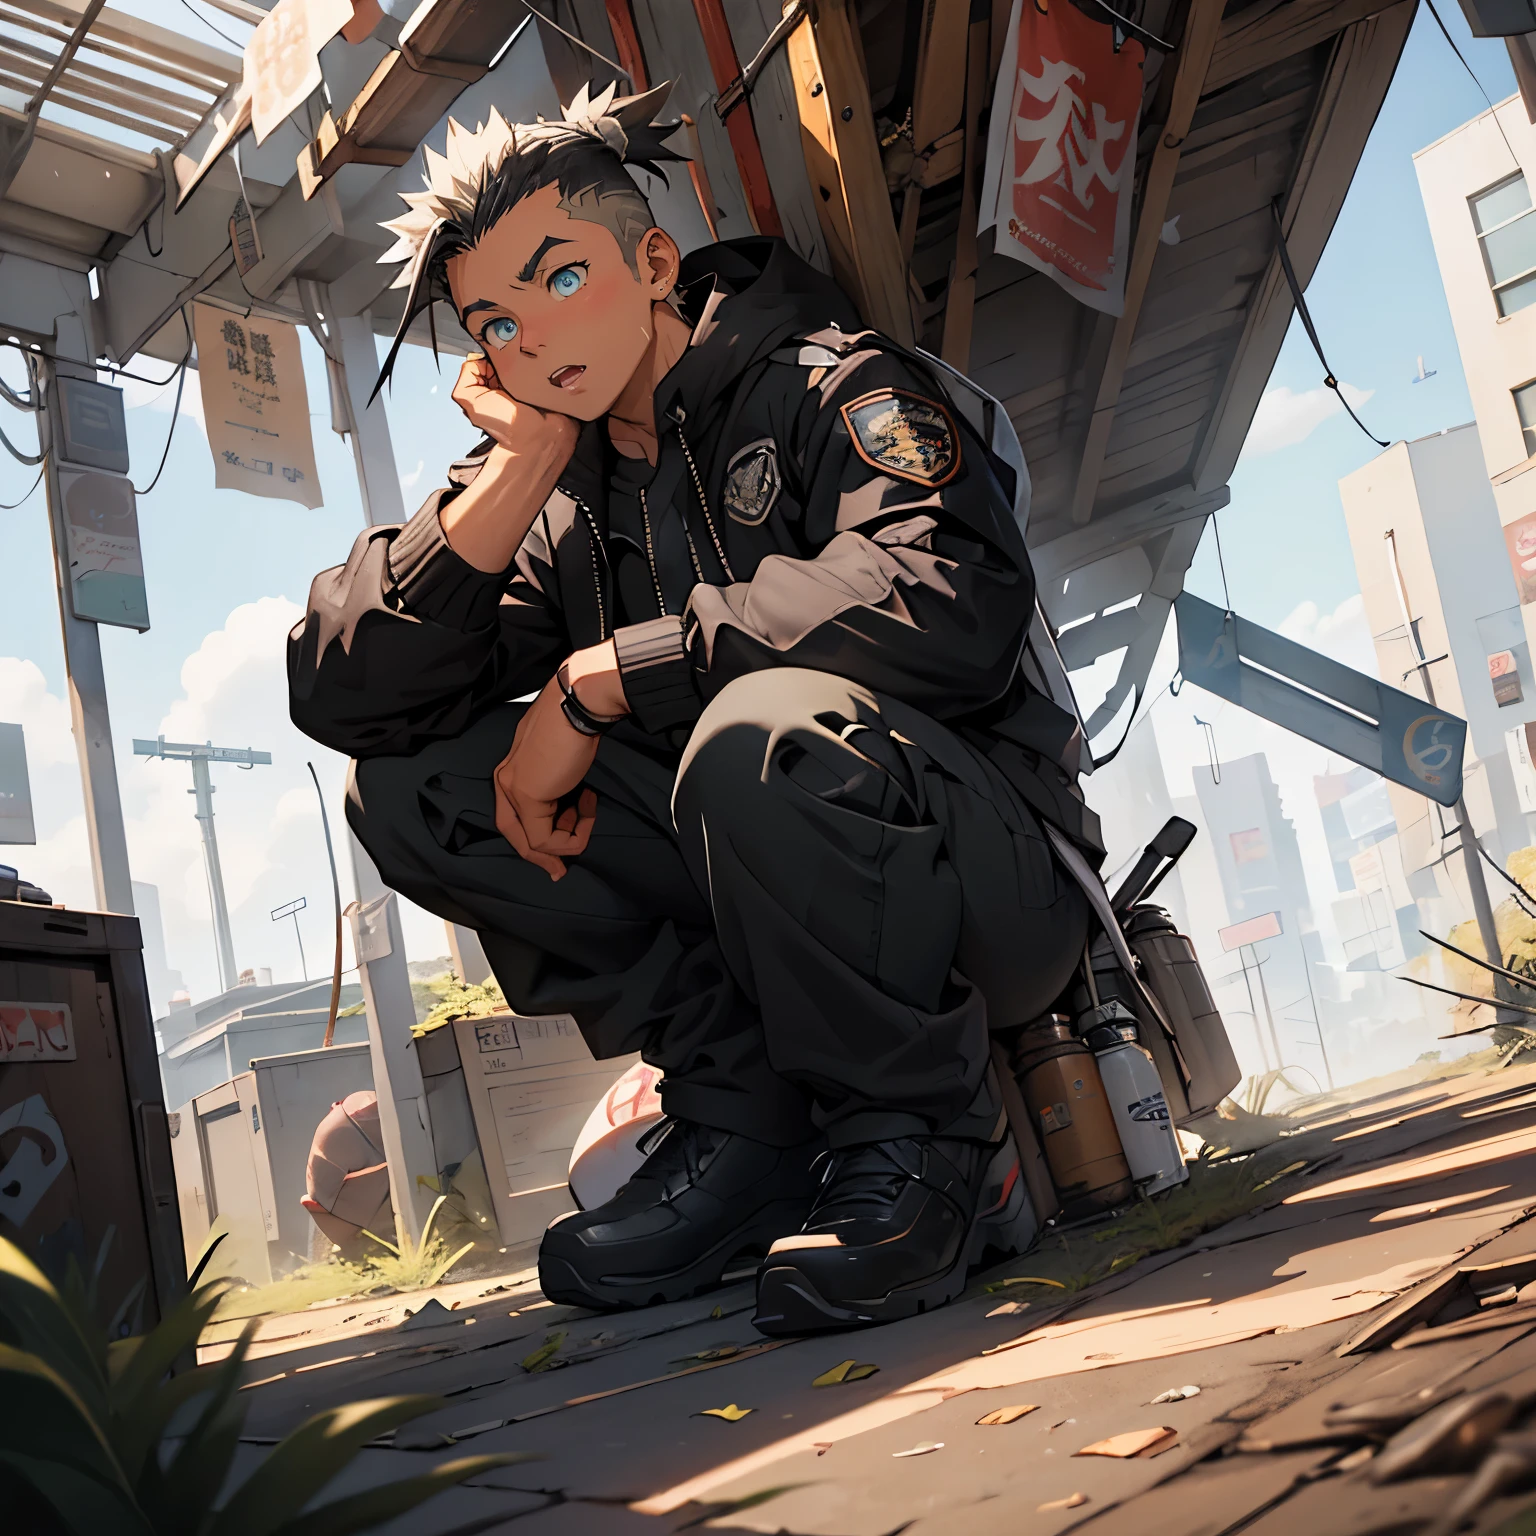 dystopian future background, Ultra high-resolution kawaii moe anime 8K, Undercut, Artificial Eagle, super buff muscular monk bent knees shirtless in futuristic black jacket, Spelling tent hard pants with wood with sprinkling eagle to man sprinkled on male seeds, Rosla global lighting, trending on artstation pixiv, Kawaii moe anime